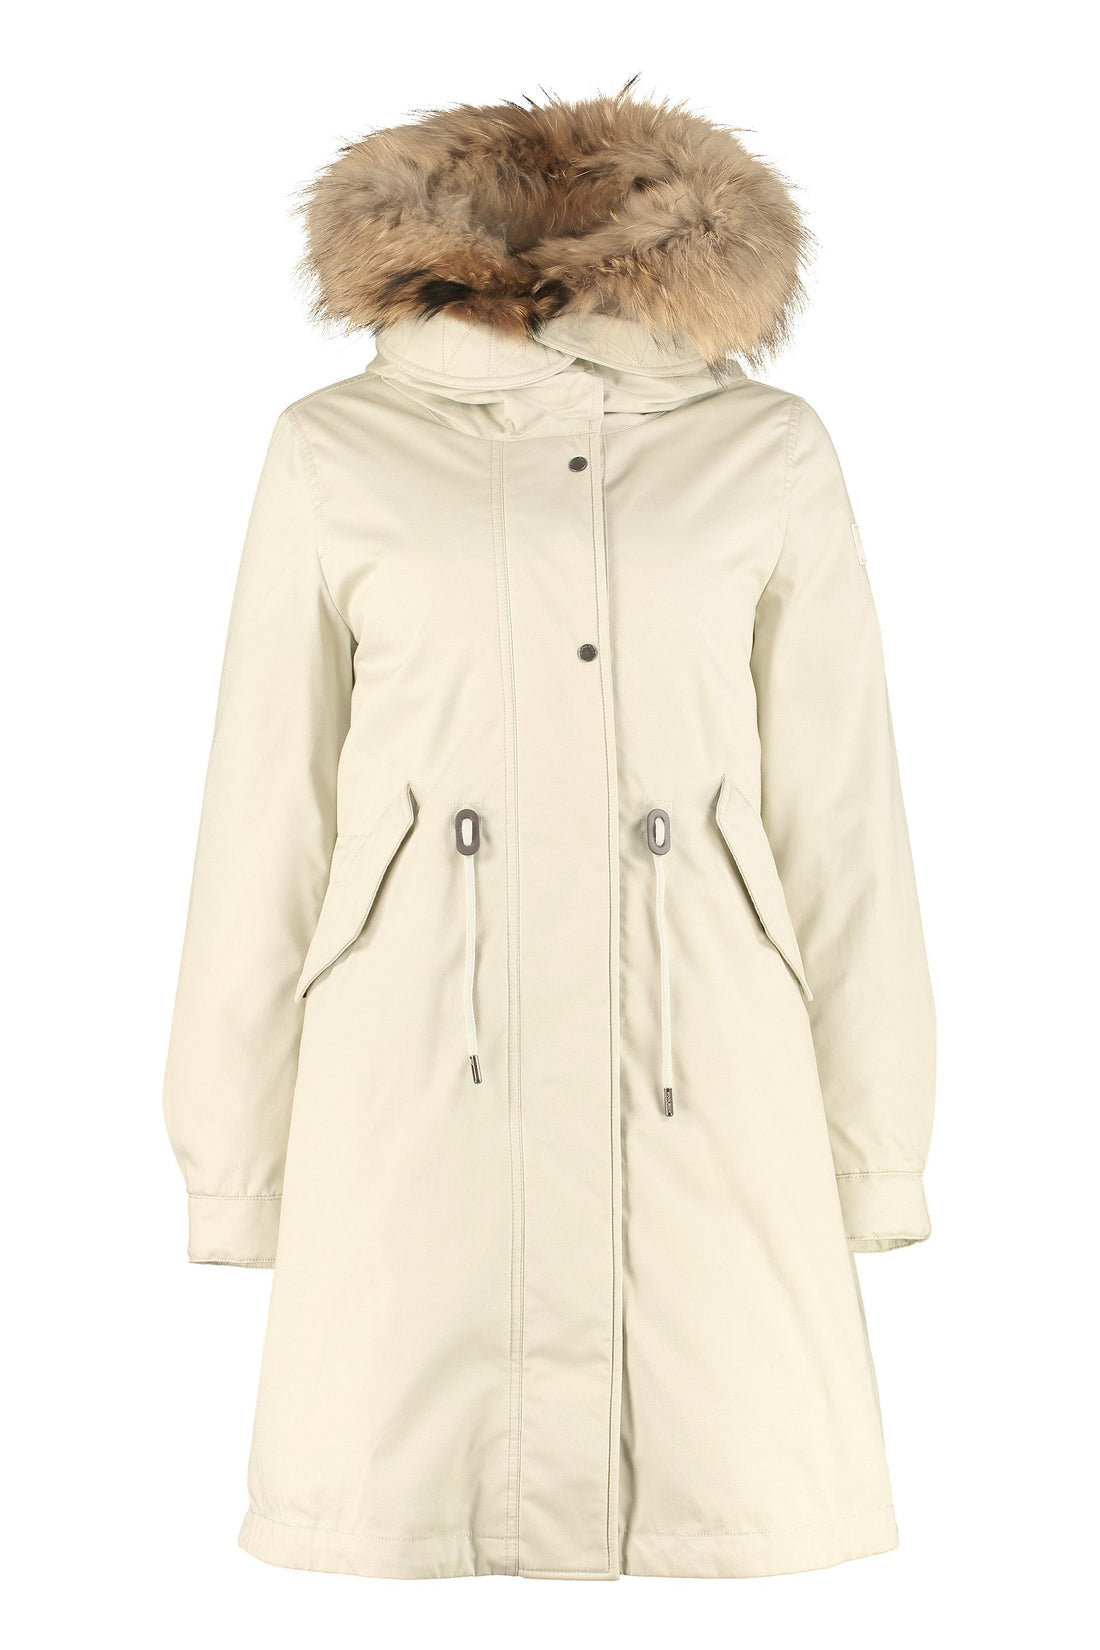 Woolrich-OUTLET-SALE-Cascade parka with removable padding-ARCHIVIST